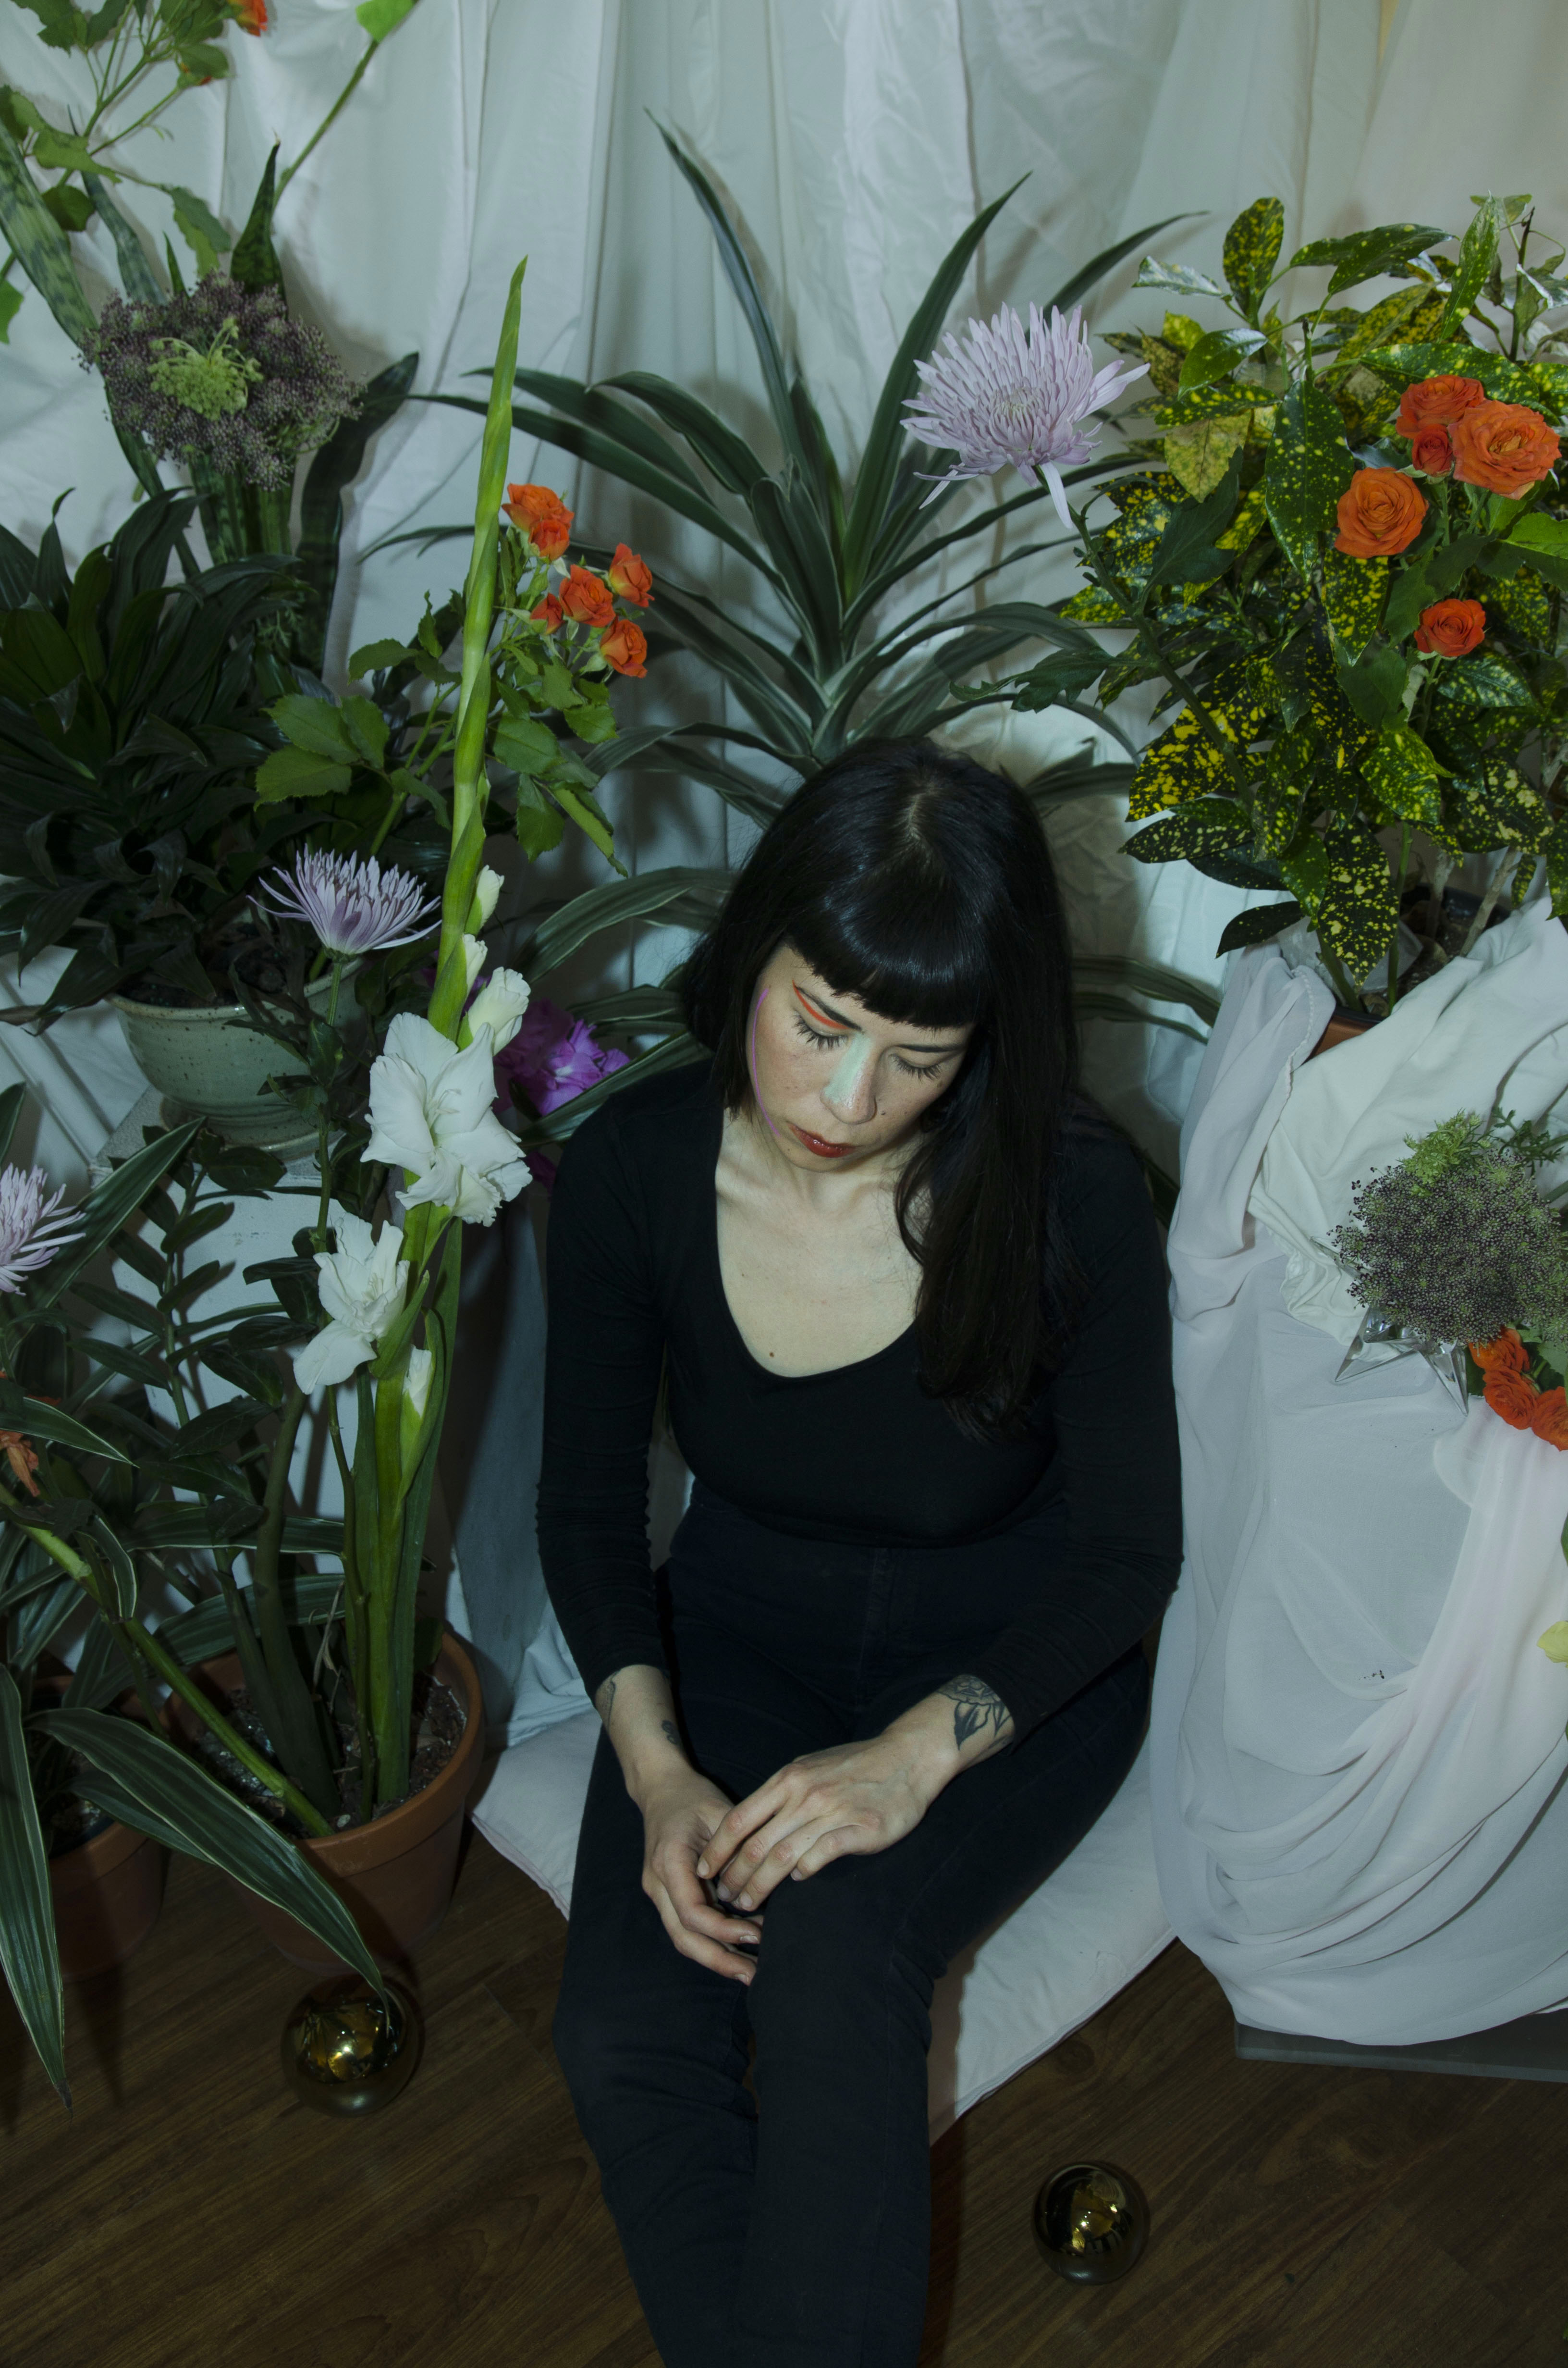 A photo of Chloe Alexandra Thompson sat in a room surrounded by plants and flowers